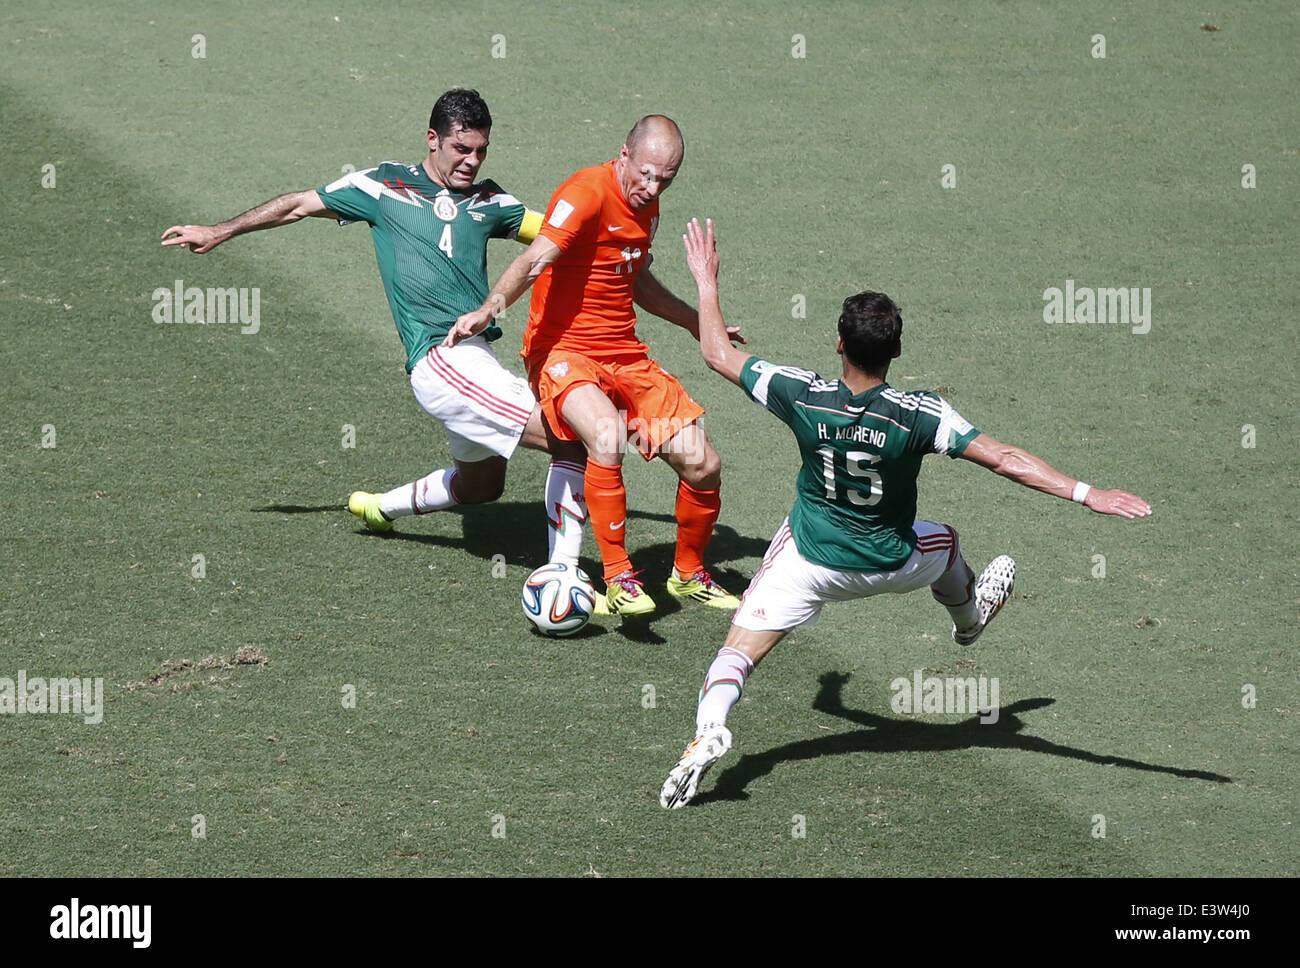 Fortaleza, Brazil. 29th June, 2014. Netherlands' Arjen Robben (C) vies with Mexico's Rafael Marquez (L) and Hector Moreno during a Round of 16 match between Netherlands and Mexico of 2014 FIFA World Cup at the Estadio Castelao Stadium in Fortaleza, Brazil, on June 29, 2014. Credit:  Liao Yujie/Xinhua/Alamy Live News Stock Photo